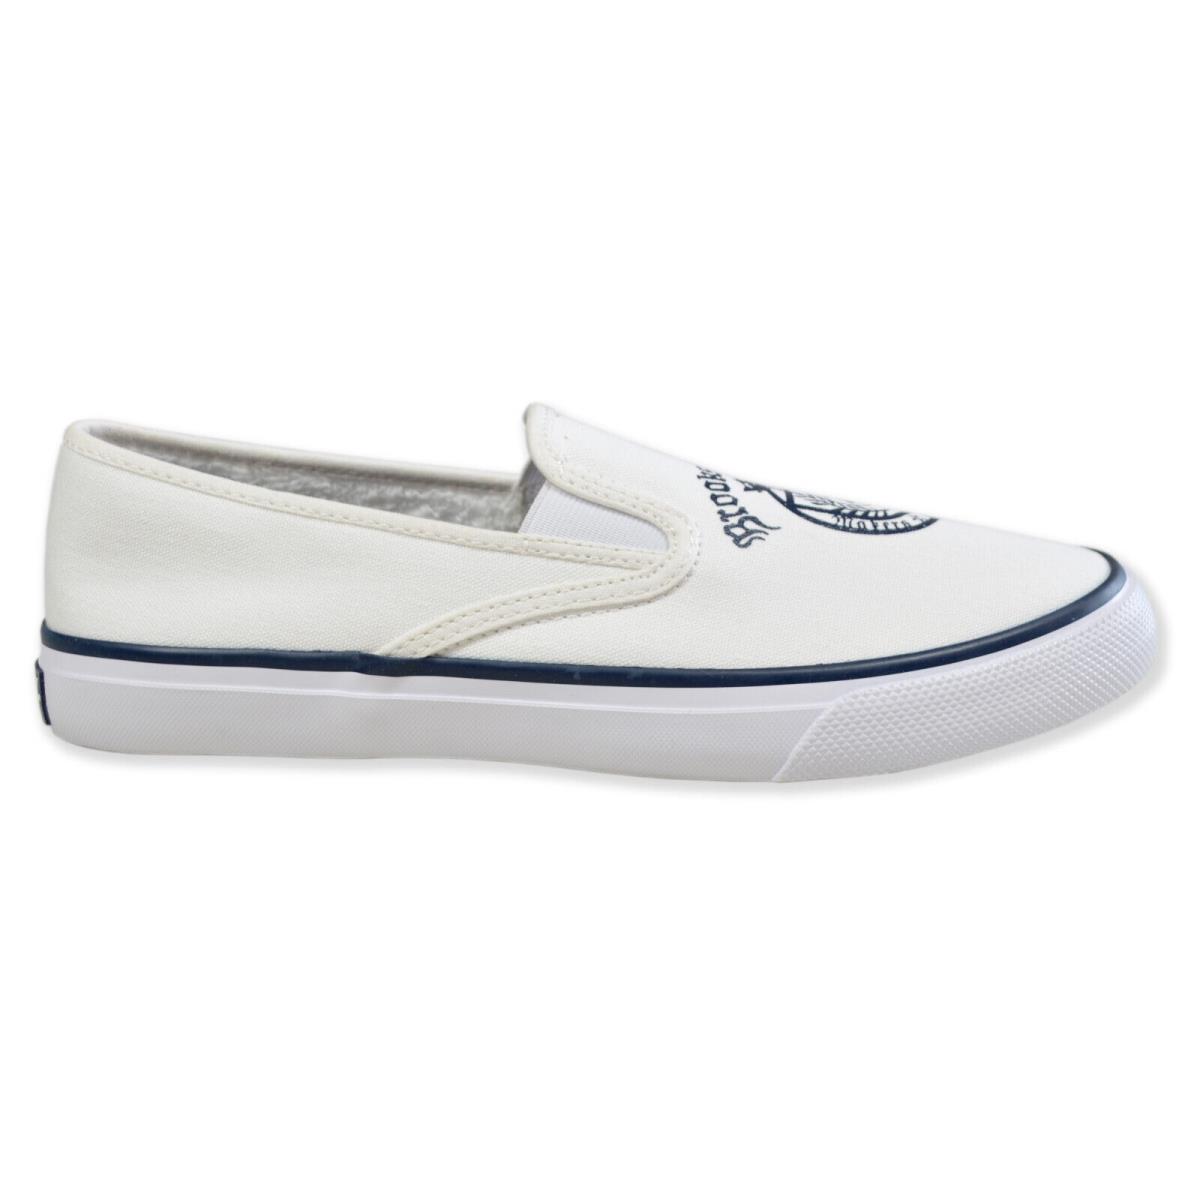 Brooks Brothers Sperry White Navy Crest Canvas Slip On Sneakers 10 M 8414-9